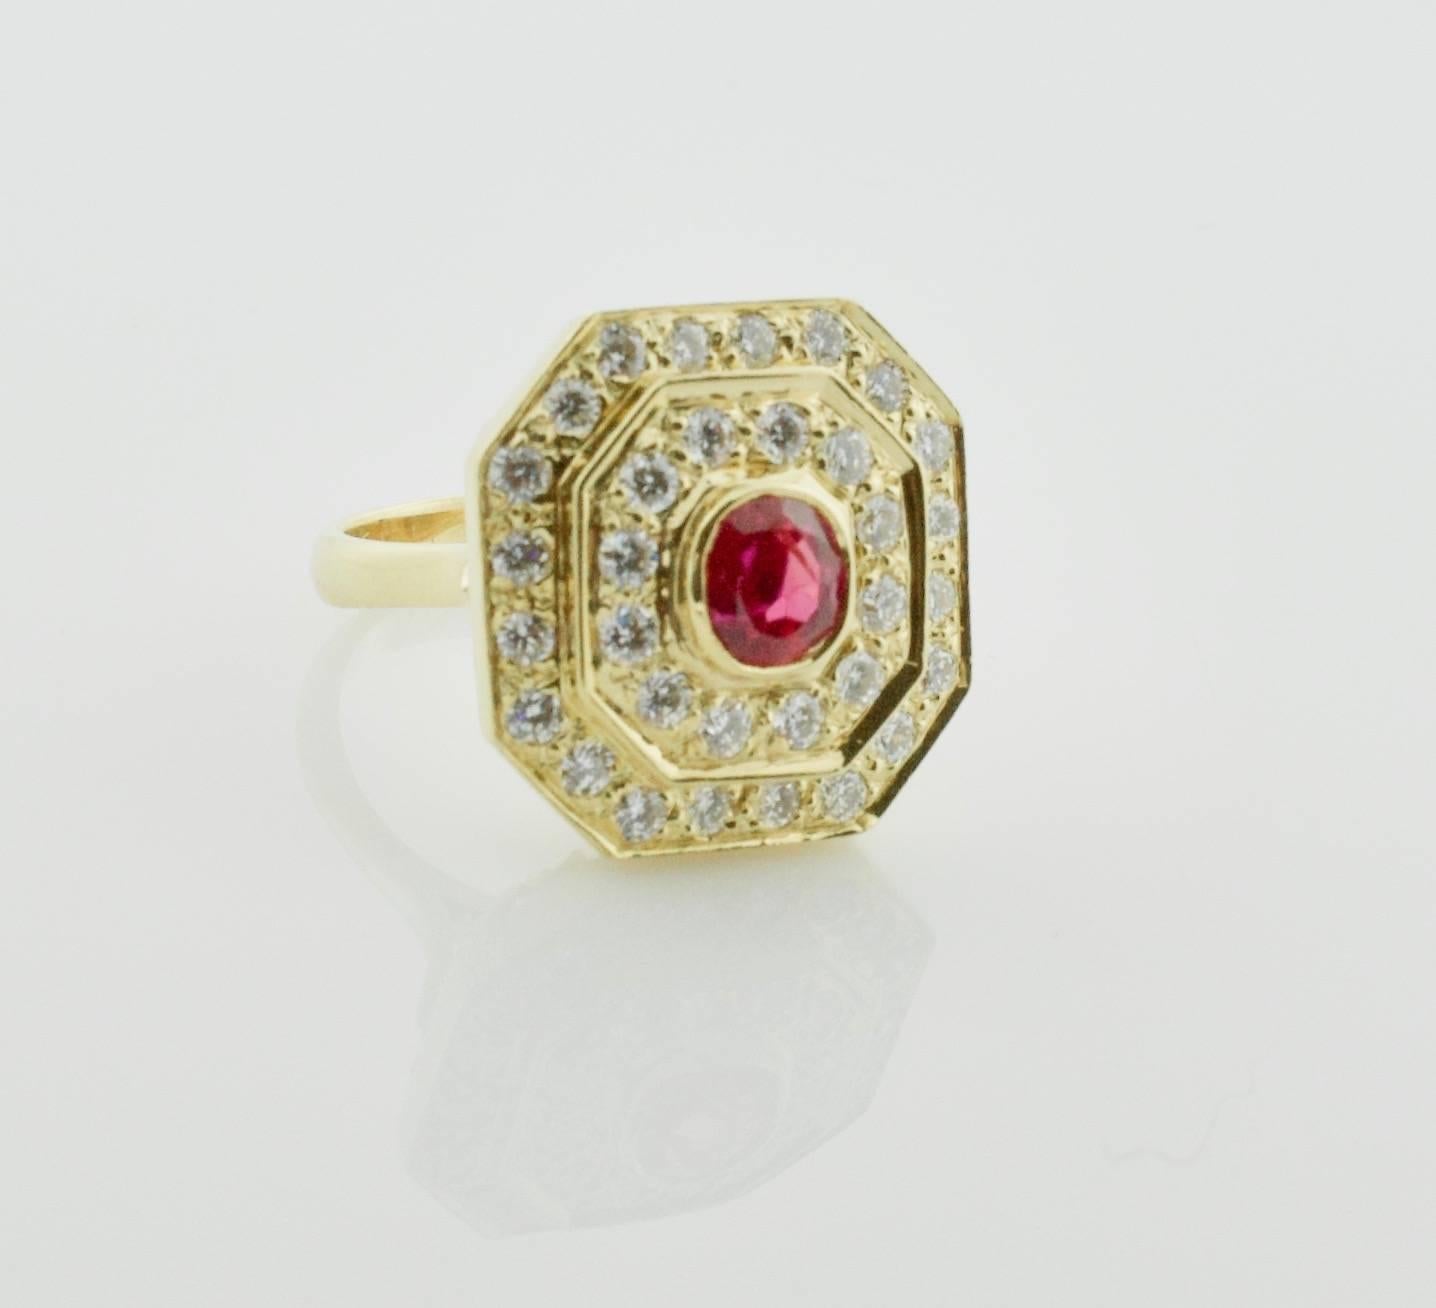 Beautifully Made Ruby and Diamond Ring in 18k Yellow Gold
One Oval Ruby weighing 1.16 carats [Bright Burma Color no imperfections visible to the naked eye
Thirty Two Round Brilliant Cut Diamonds weighing 1.30 carats [GH VVS-VS2]
Superb Wire Work on